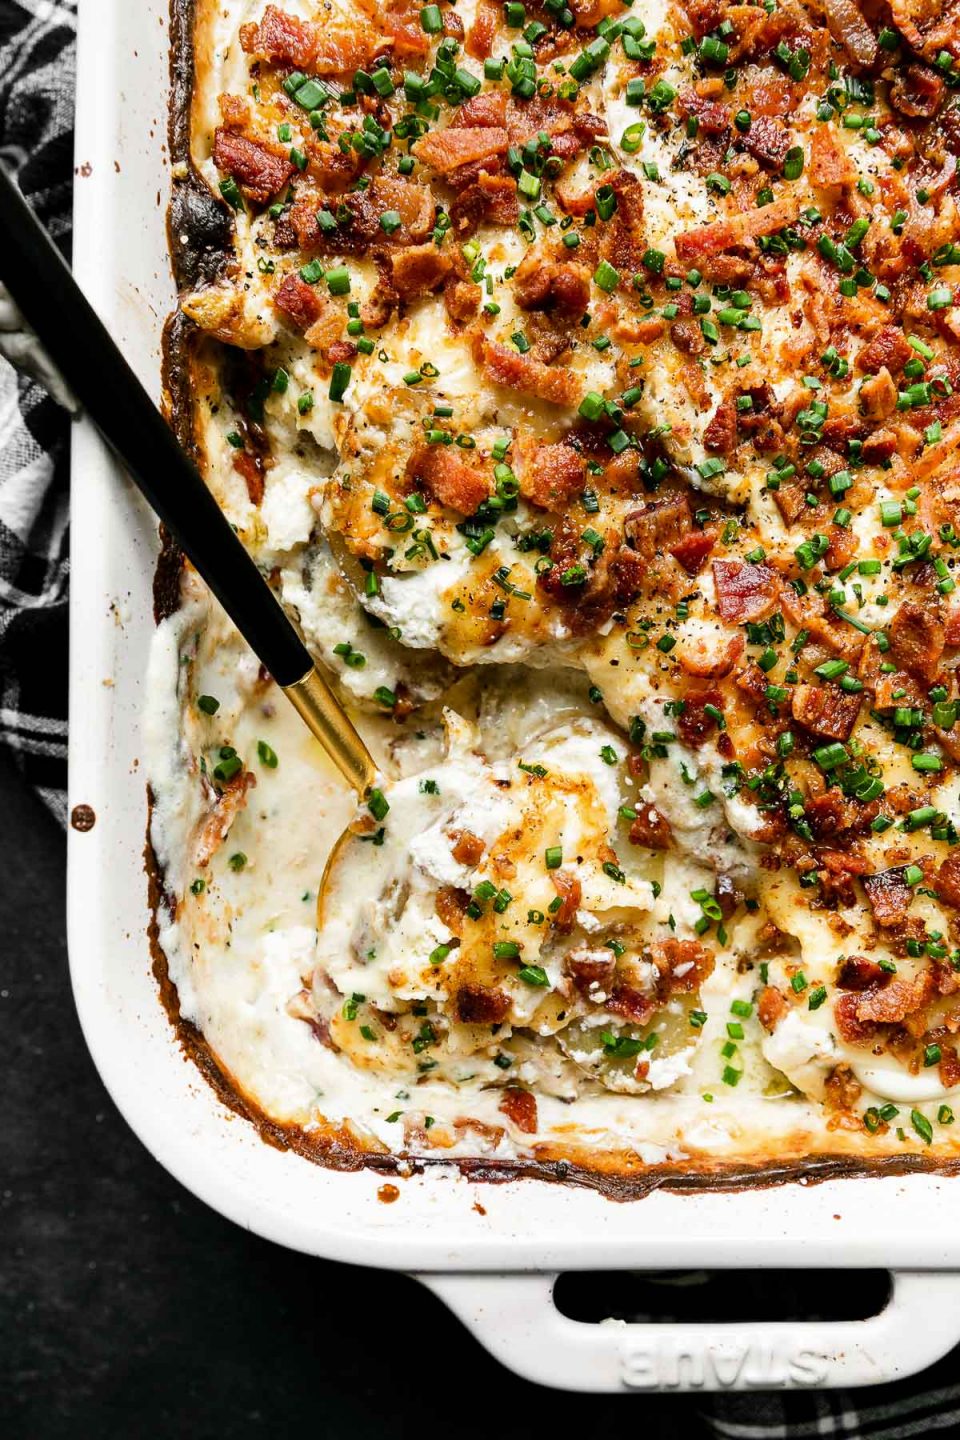 Mom's Loaded Au Gratin Potatoes in a white Staub baking dish sit atop a dark textured surface. A black and white plaid linen napkin rest underneath the baking dish. A black and gold serving spoon rests inside of the baking dish and a portion of the dish has been served.